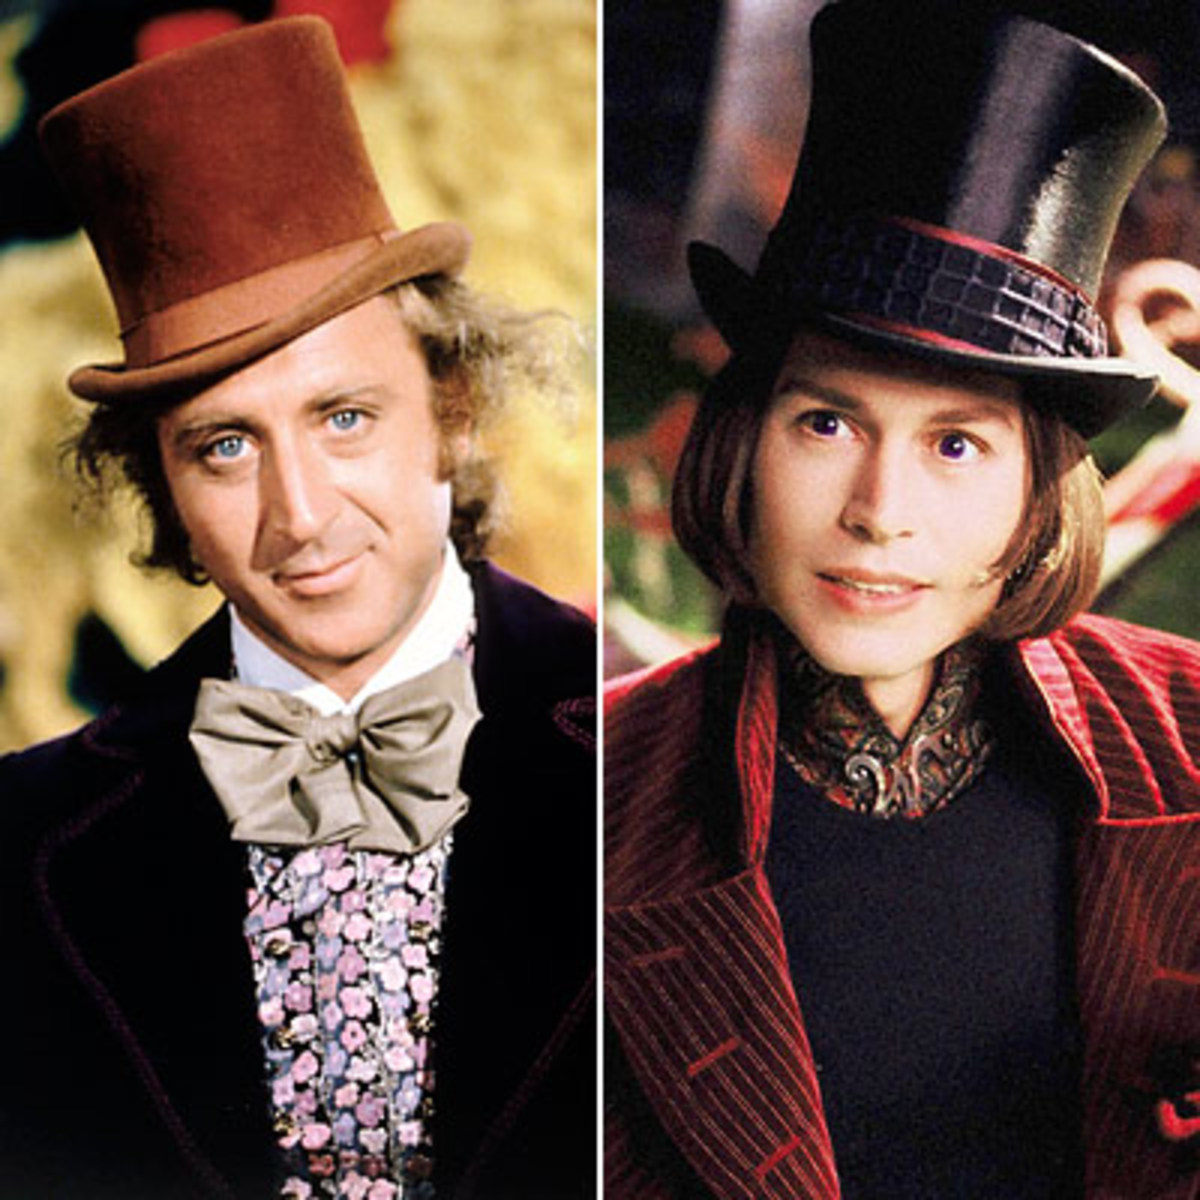 The two versions of Willy Wonka